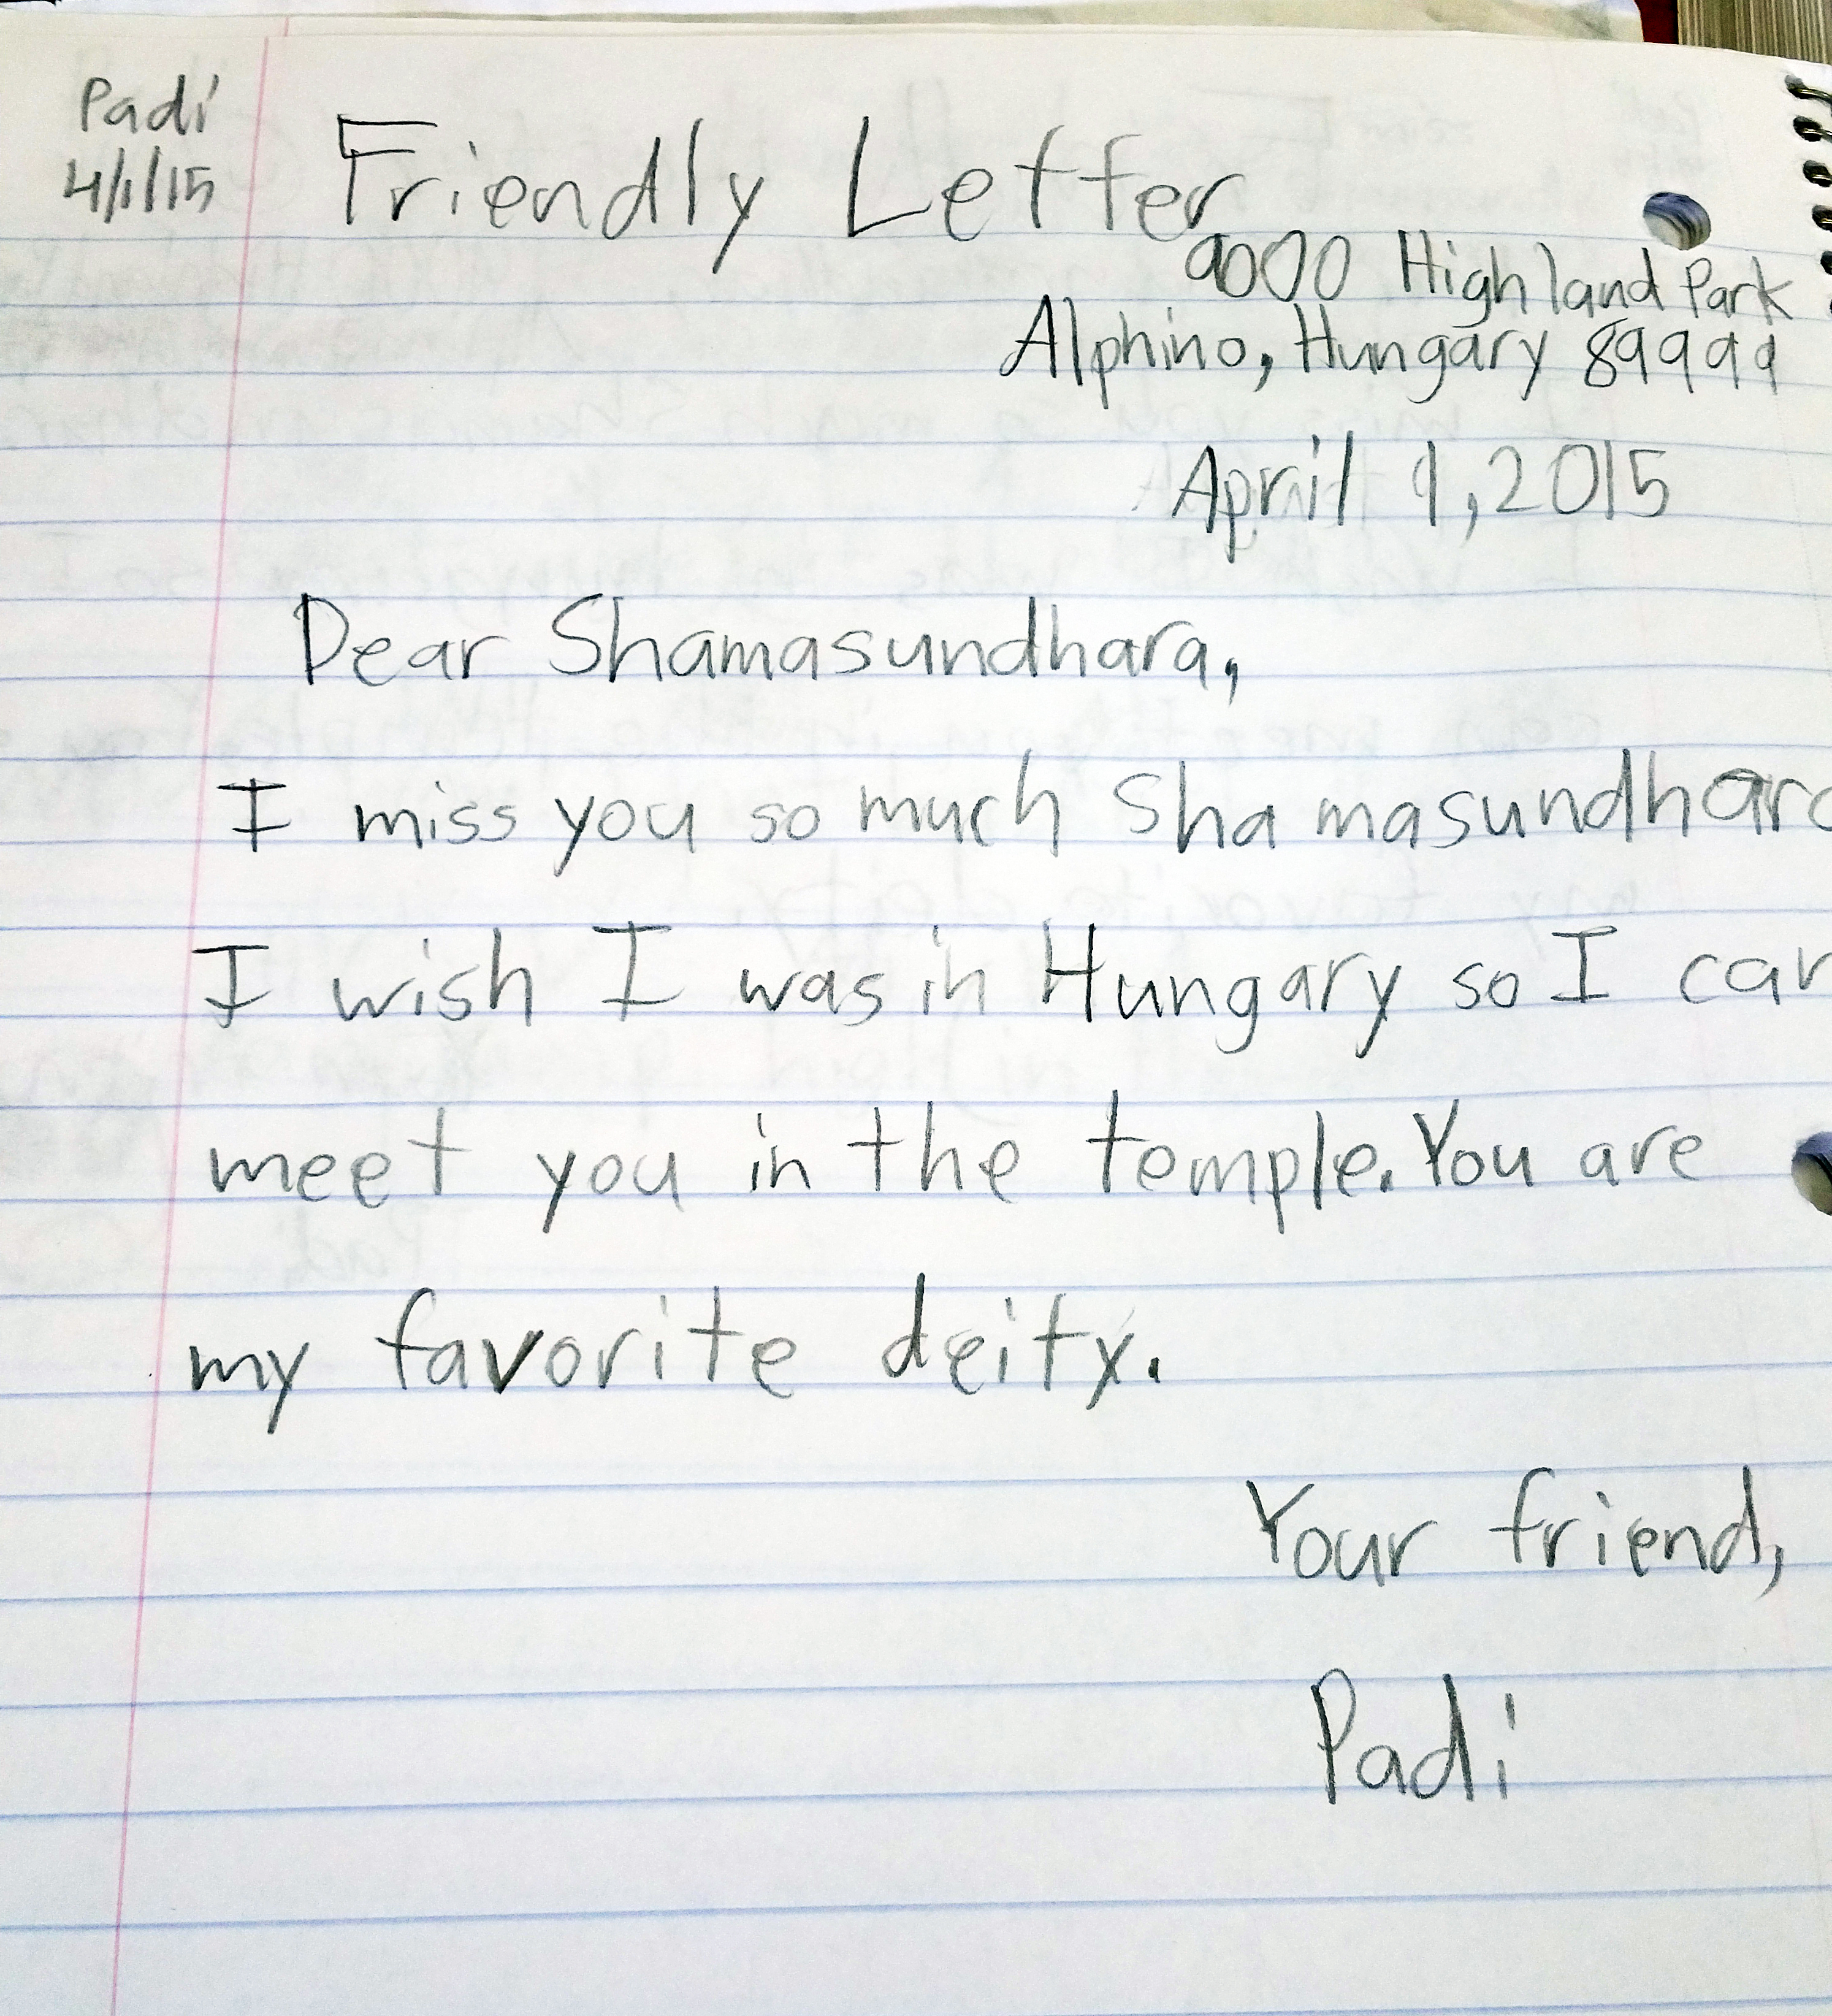 A Friendly Letter Makes Padi Cry?  TKG Academy